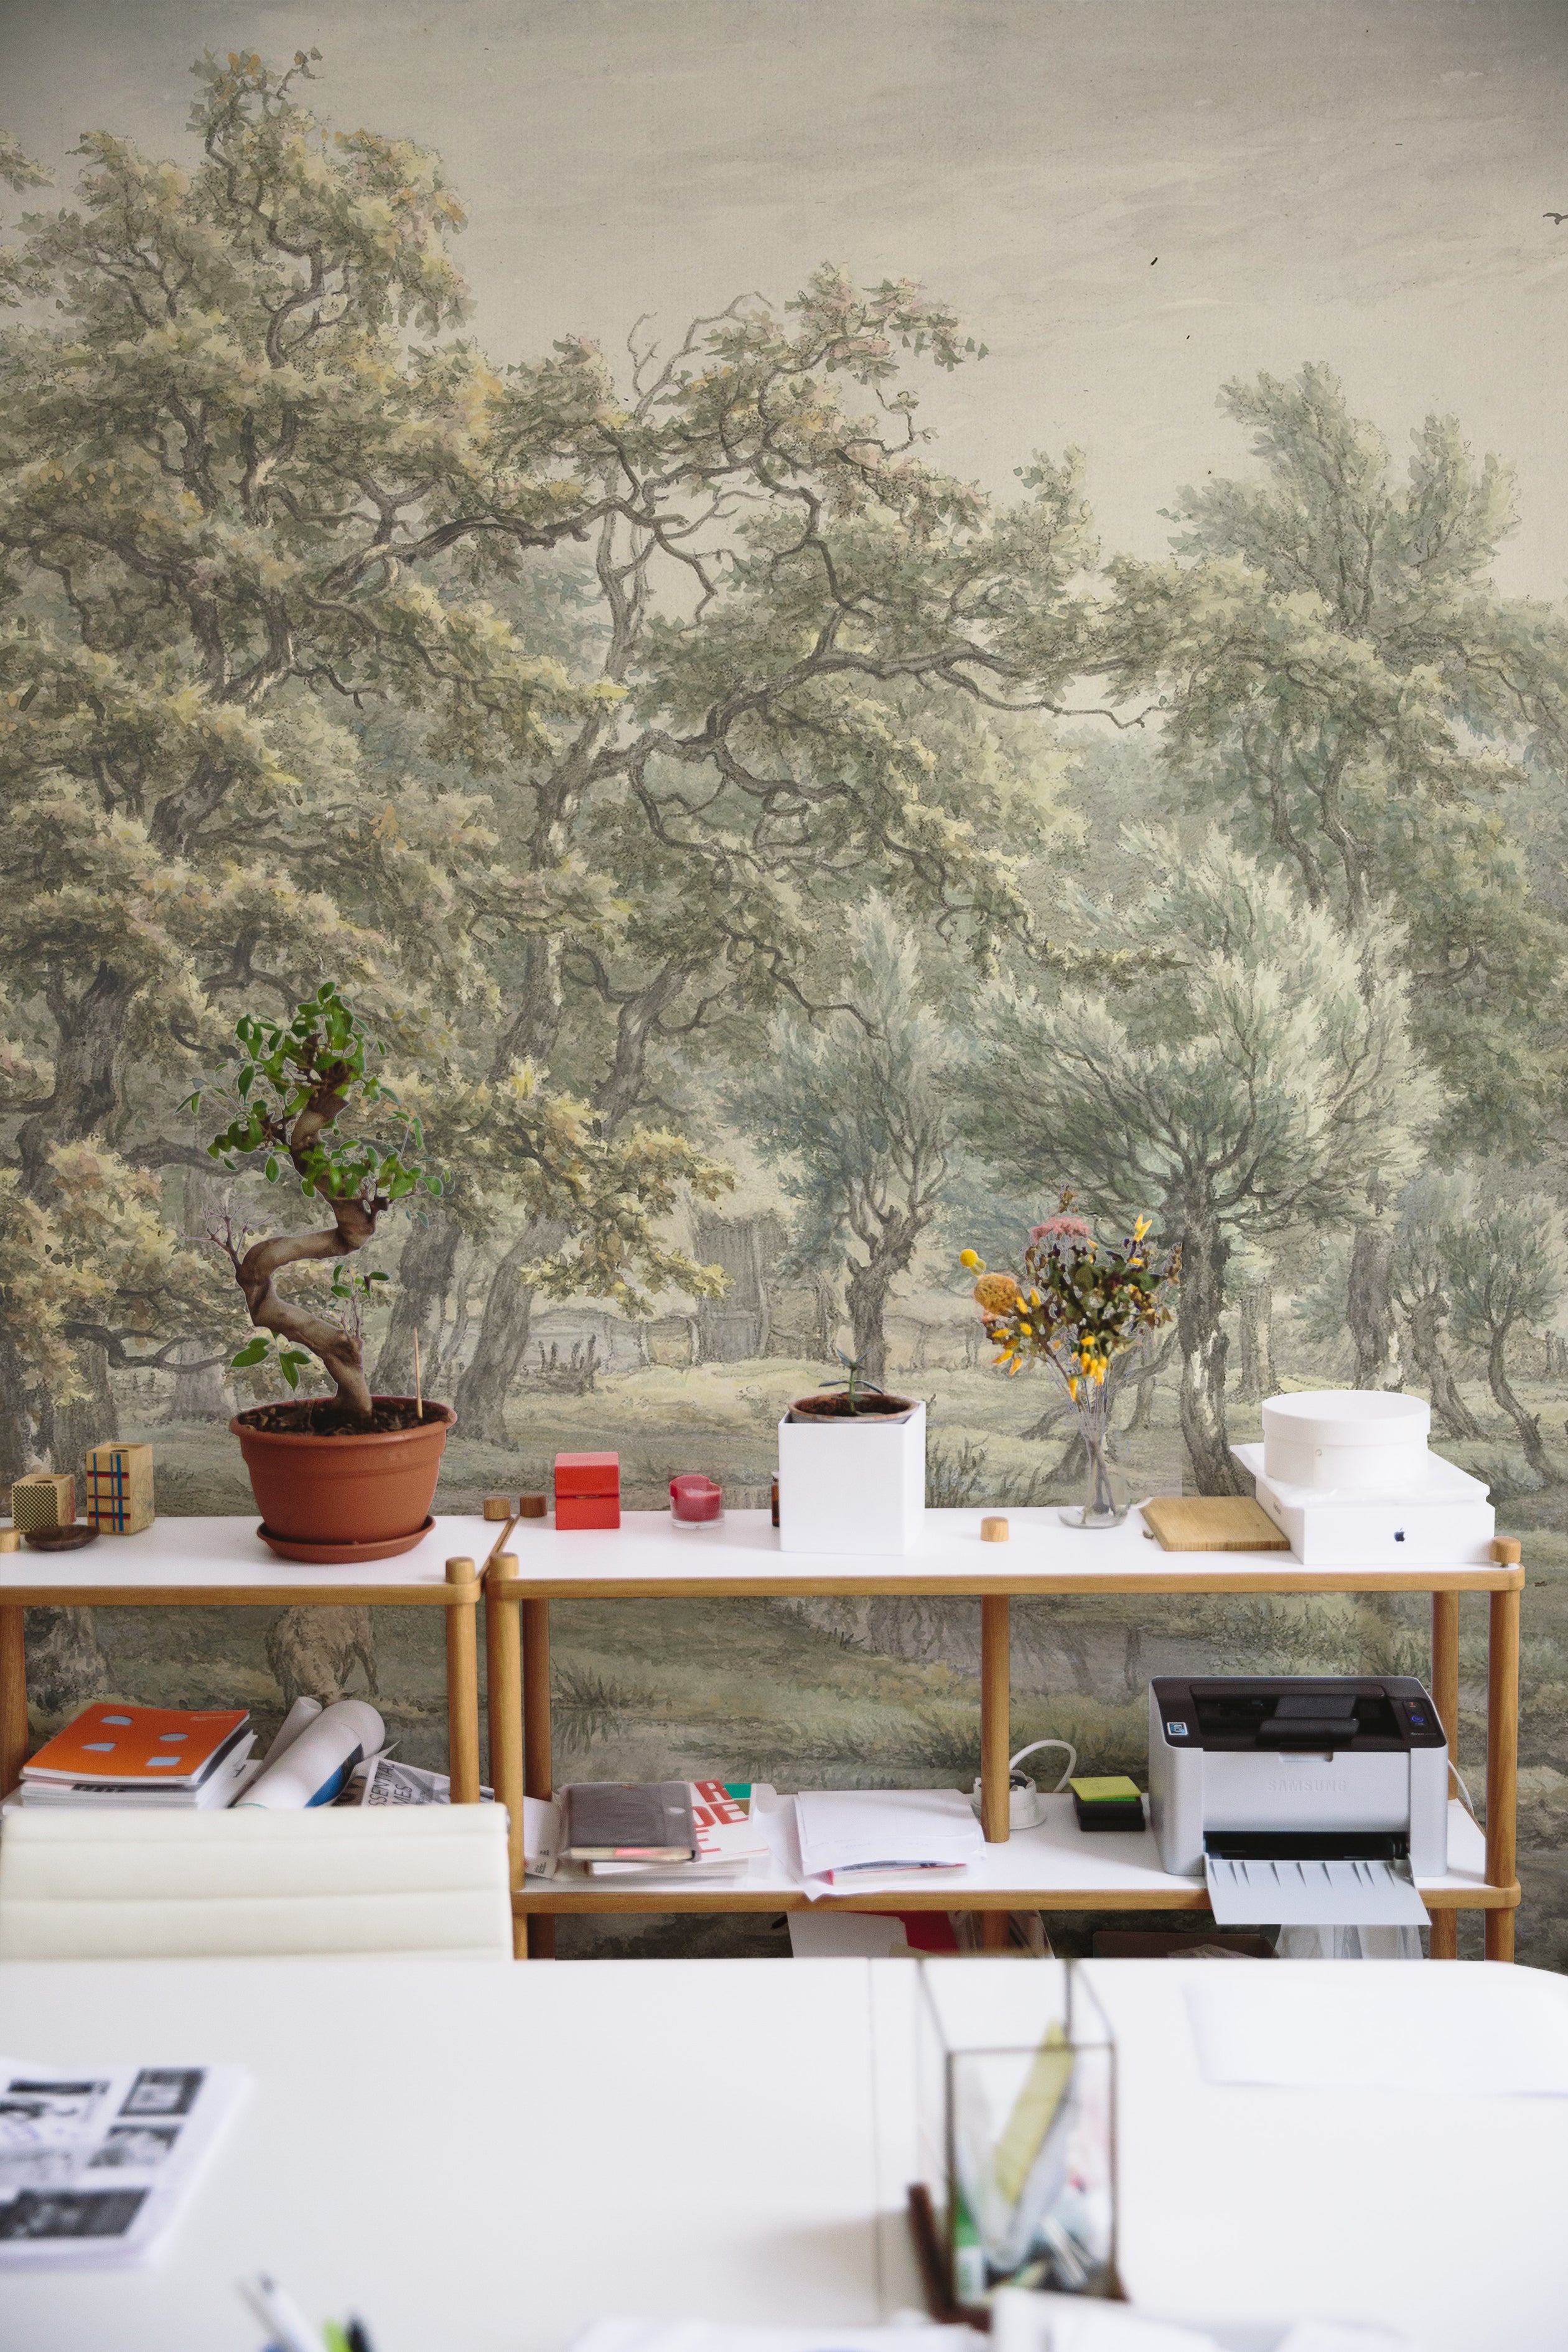 A vibrant workspace with a long wooden desk cluttered with office supplies, facing a wall mural depicting a serene 18th-century landscape scene from Eext with detailed trees and a pastoral setting.